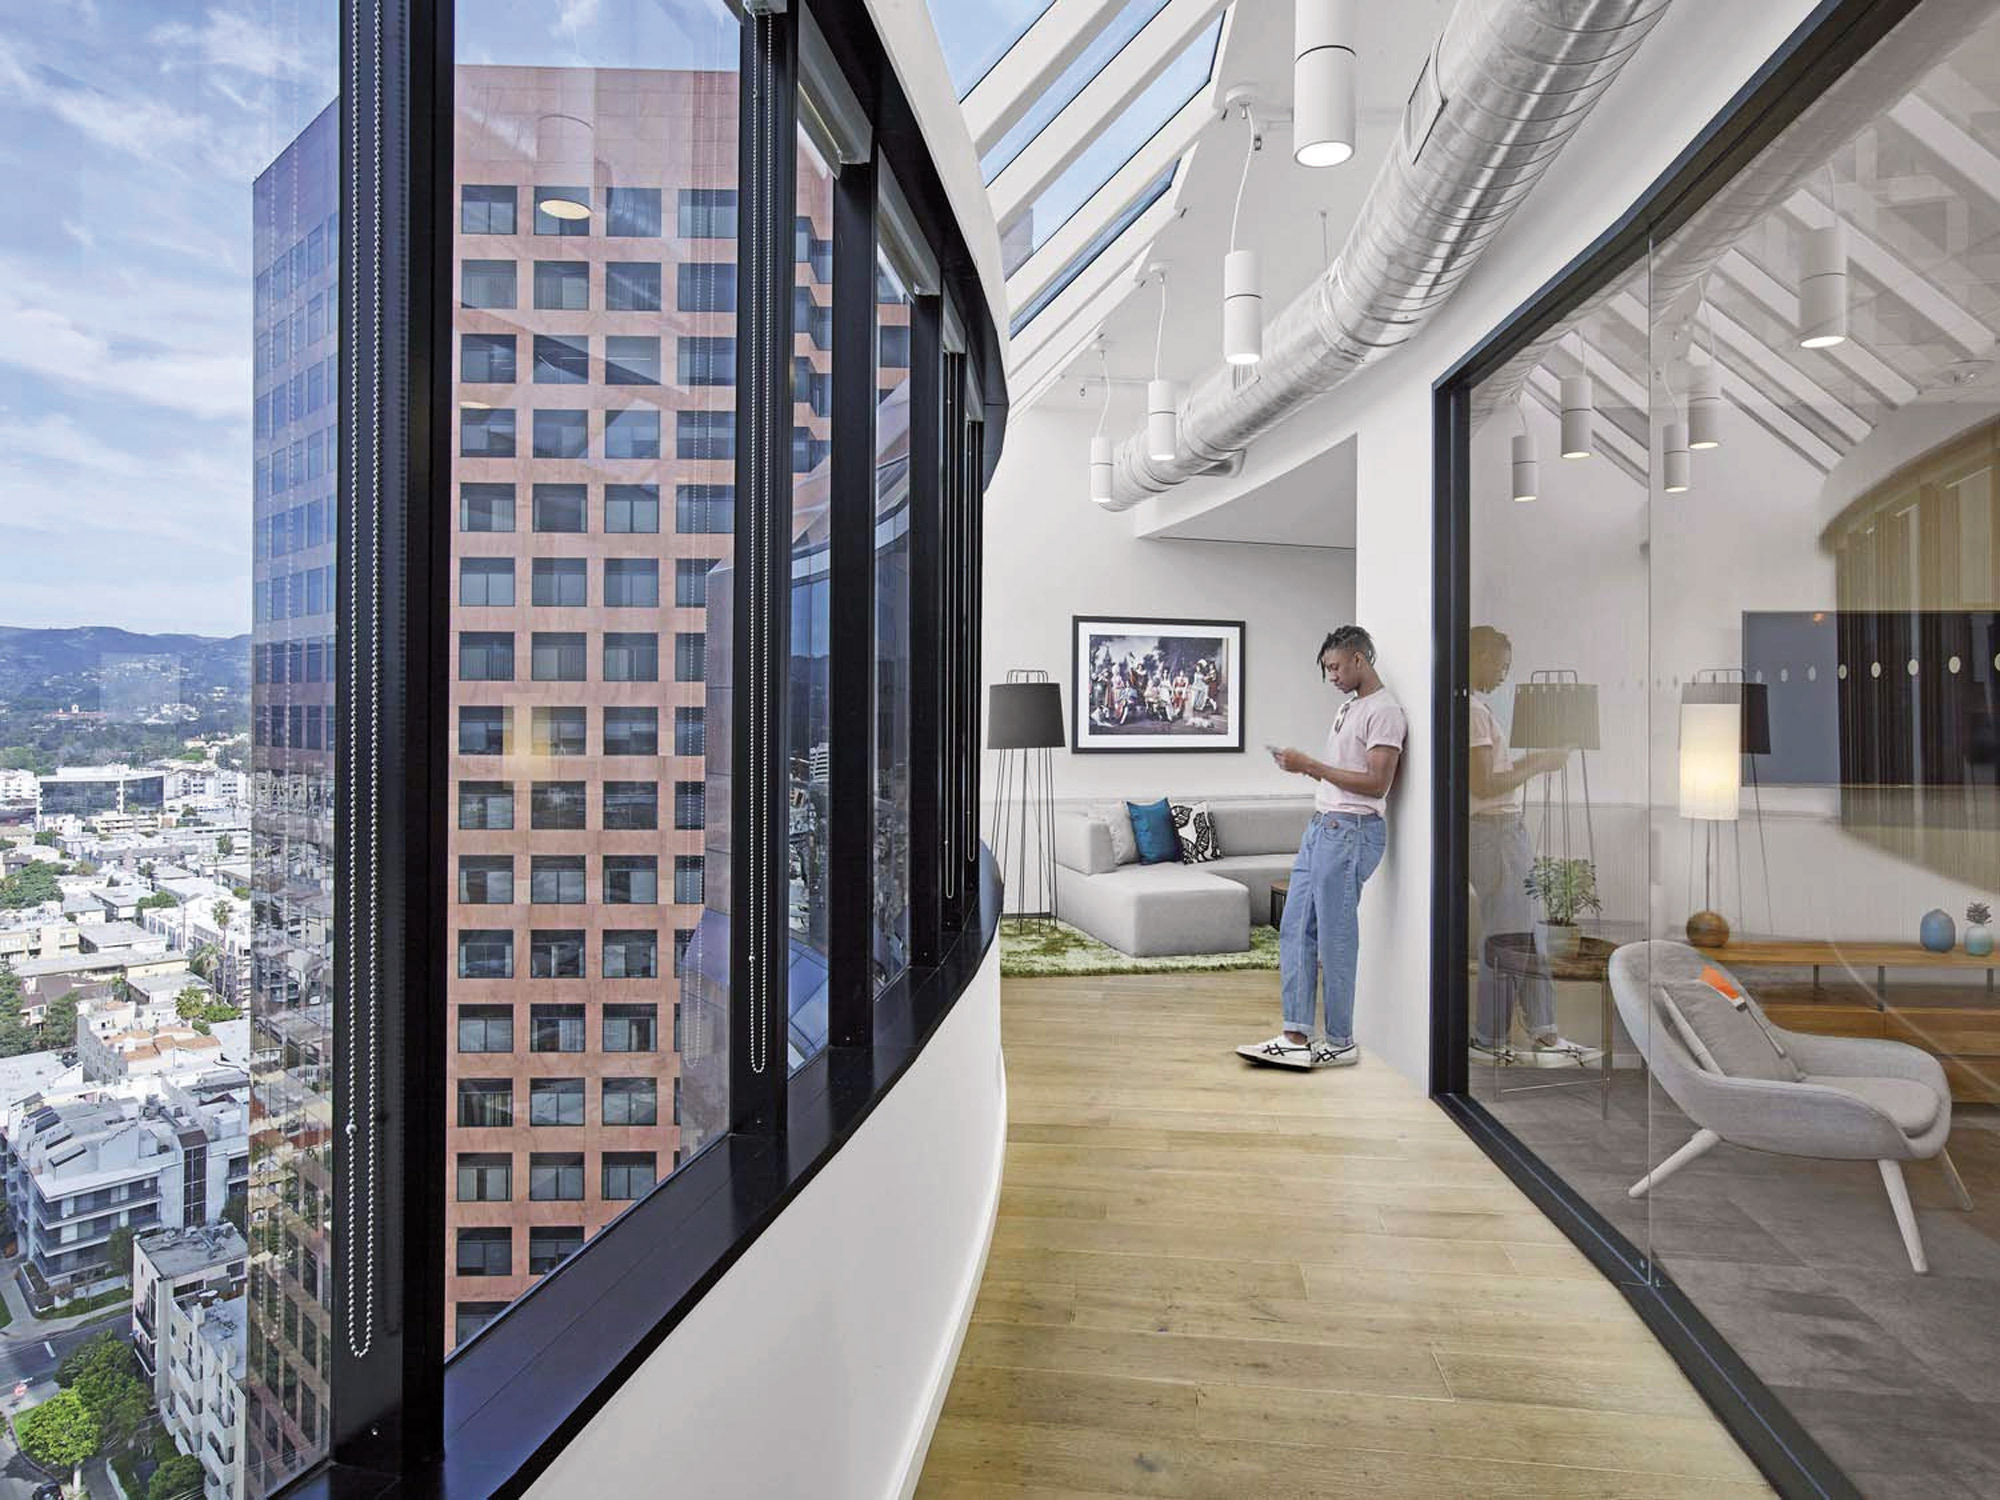 Modern office lounge with expansive cityscape views through floor-to-ceiling windows. Interior features minimalist design with exposed ductwork ceilings, hardwood floors, and a sleek, white armchair. A person stands contemplatively by a digital art display.